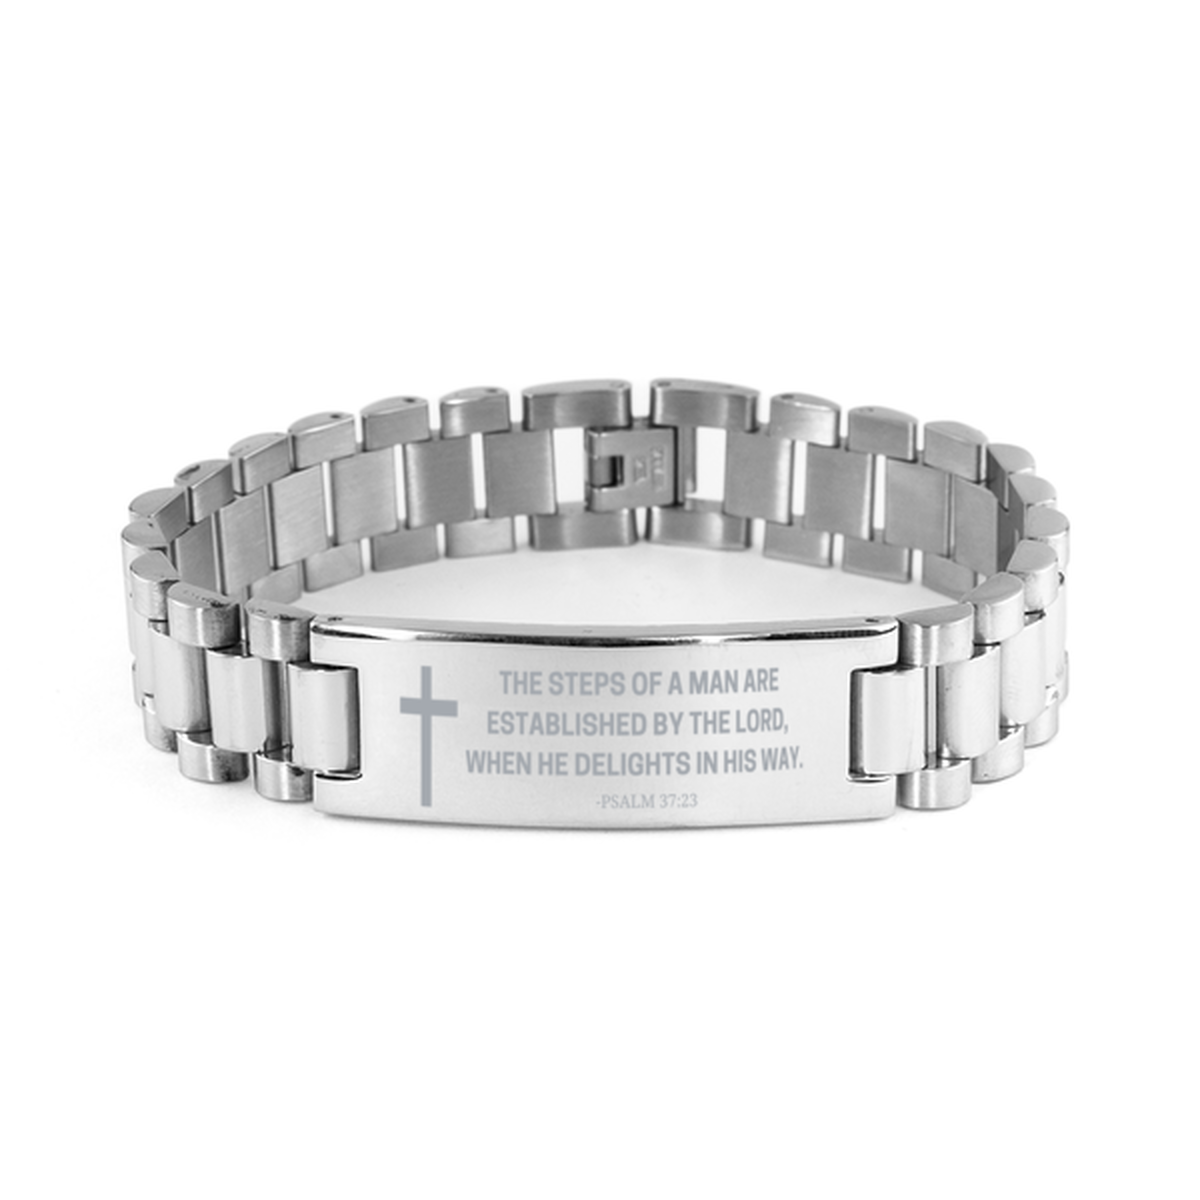 Baptism Gifts For Teenage Boys Girls, Christian Bible Verse Ladder Stainless Steel Bracelet, The steps of a man are, Catholic Confirmation Gifts for Son, Godson, Grandson, Nephew